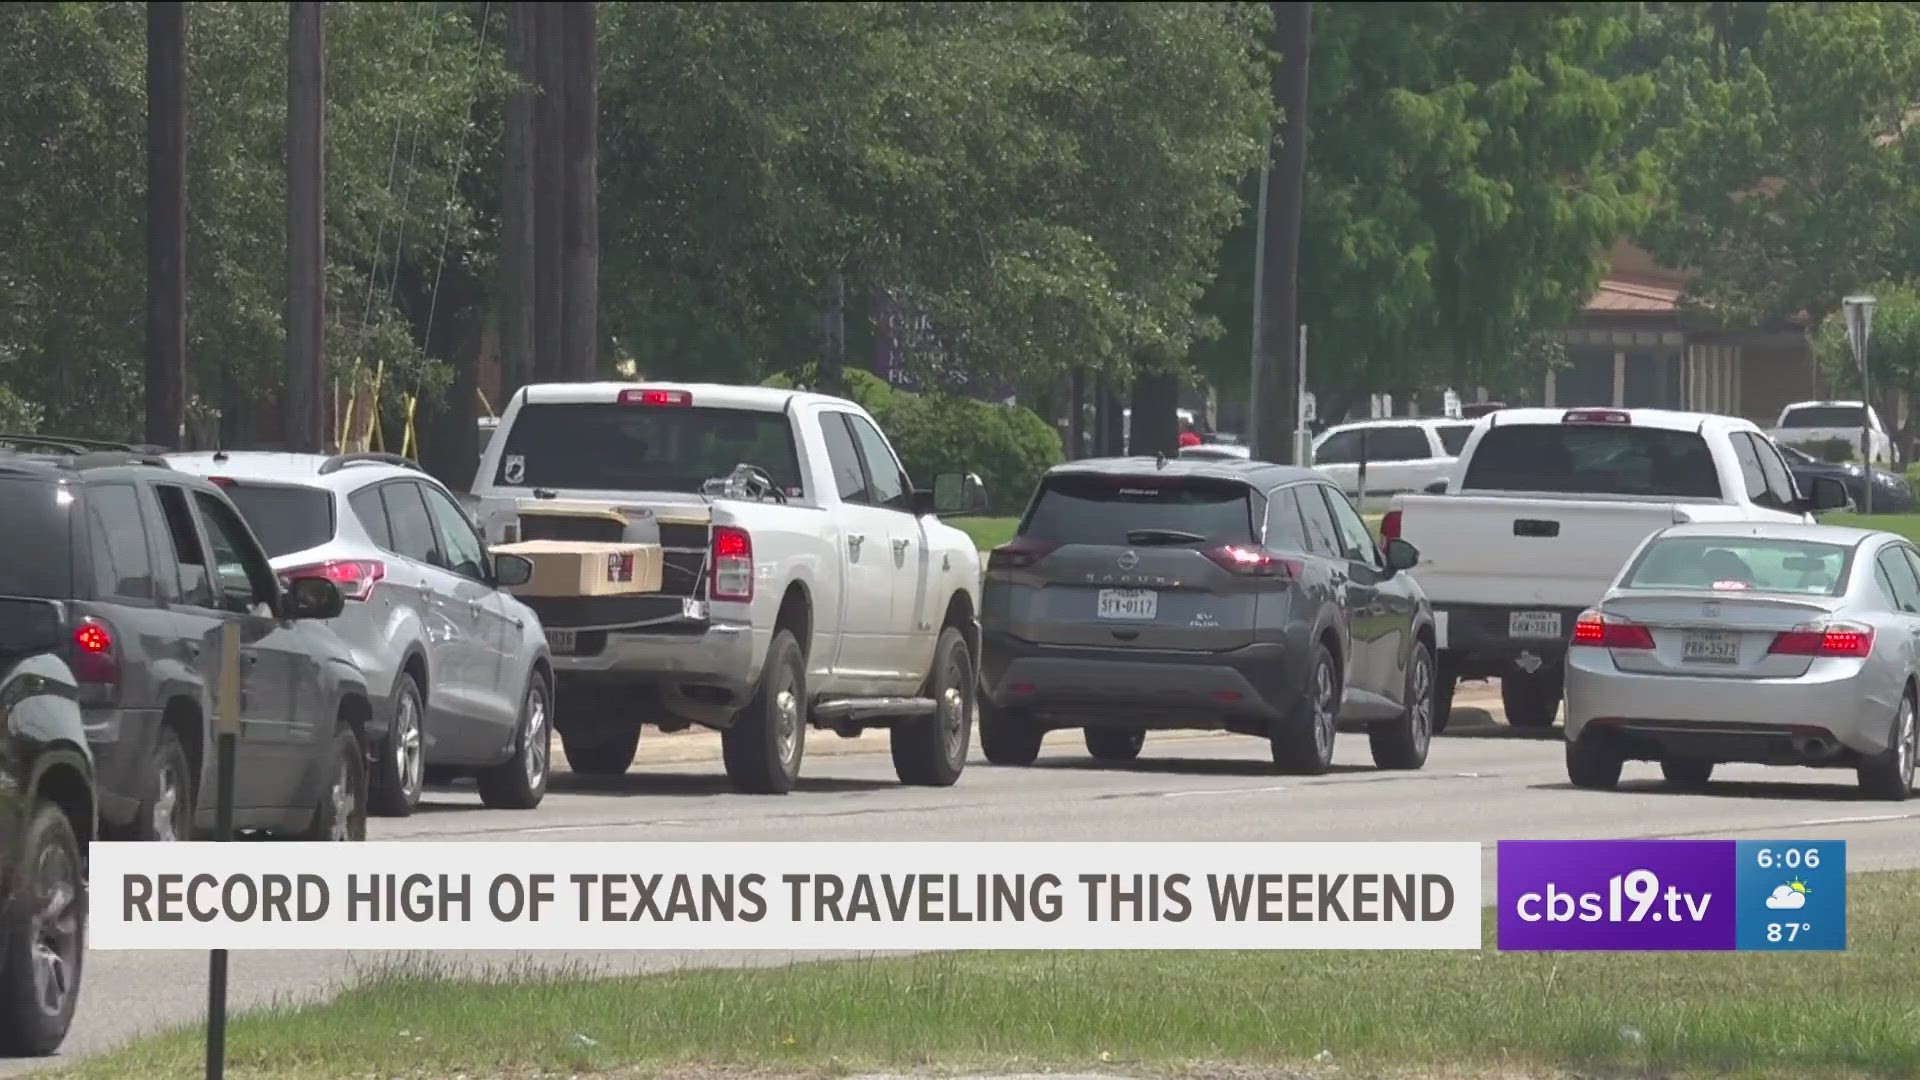 It’s the unofficial start of summer and East Texans are getting ready to enjoy Memorial weekend.